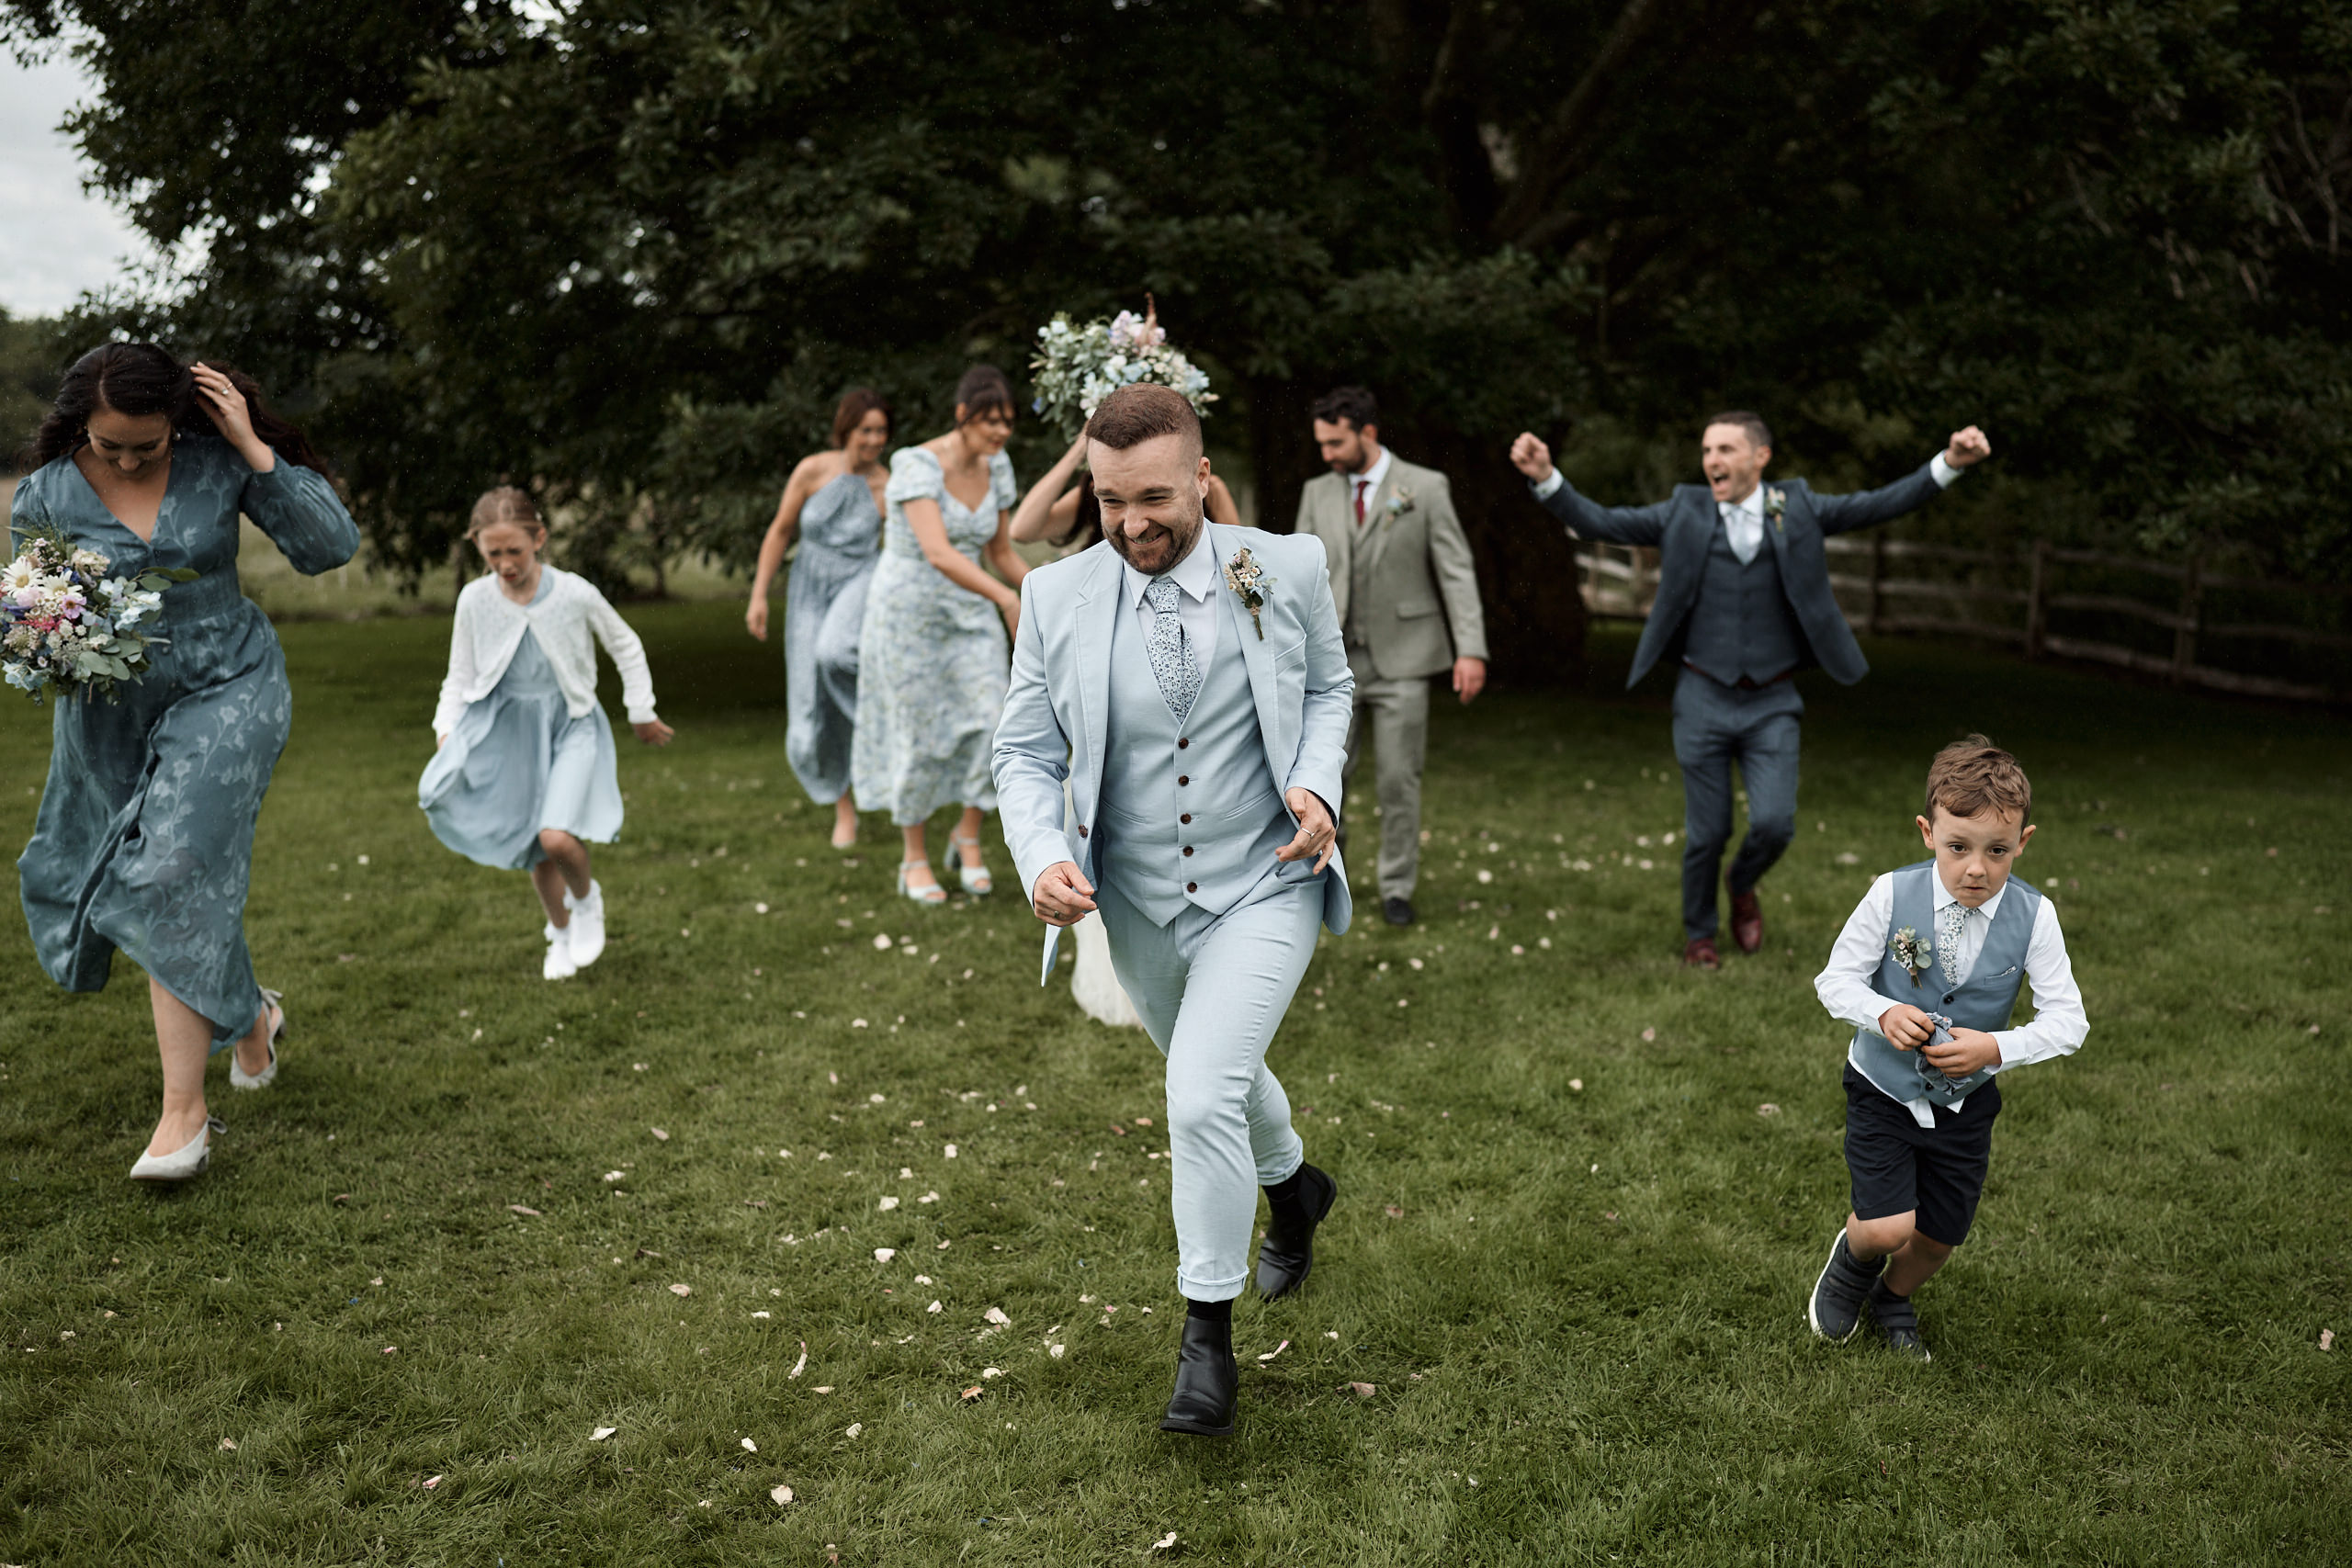 A bunch of bridesmaids and groomsmanship rushing across a field.